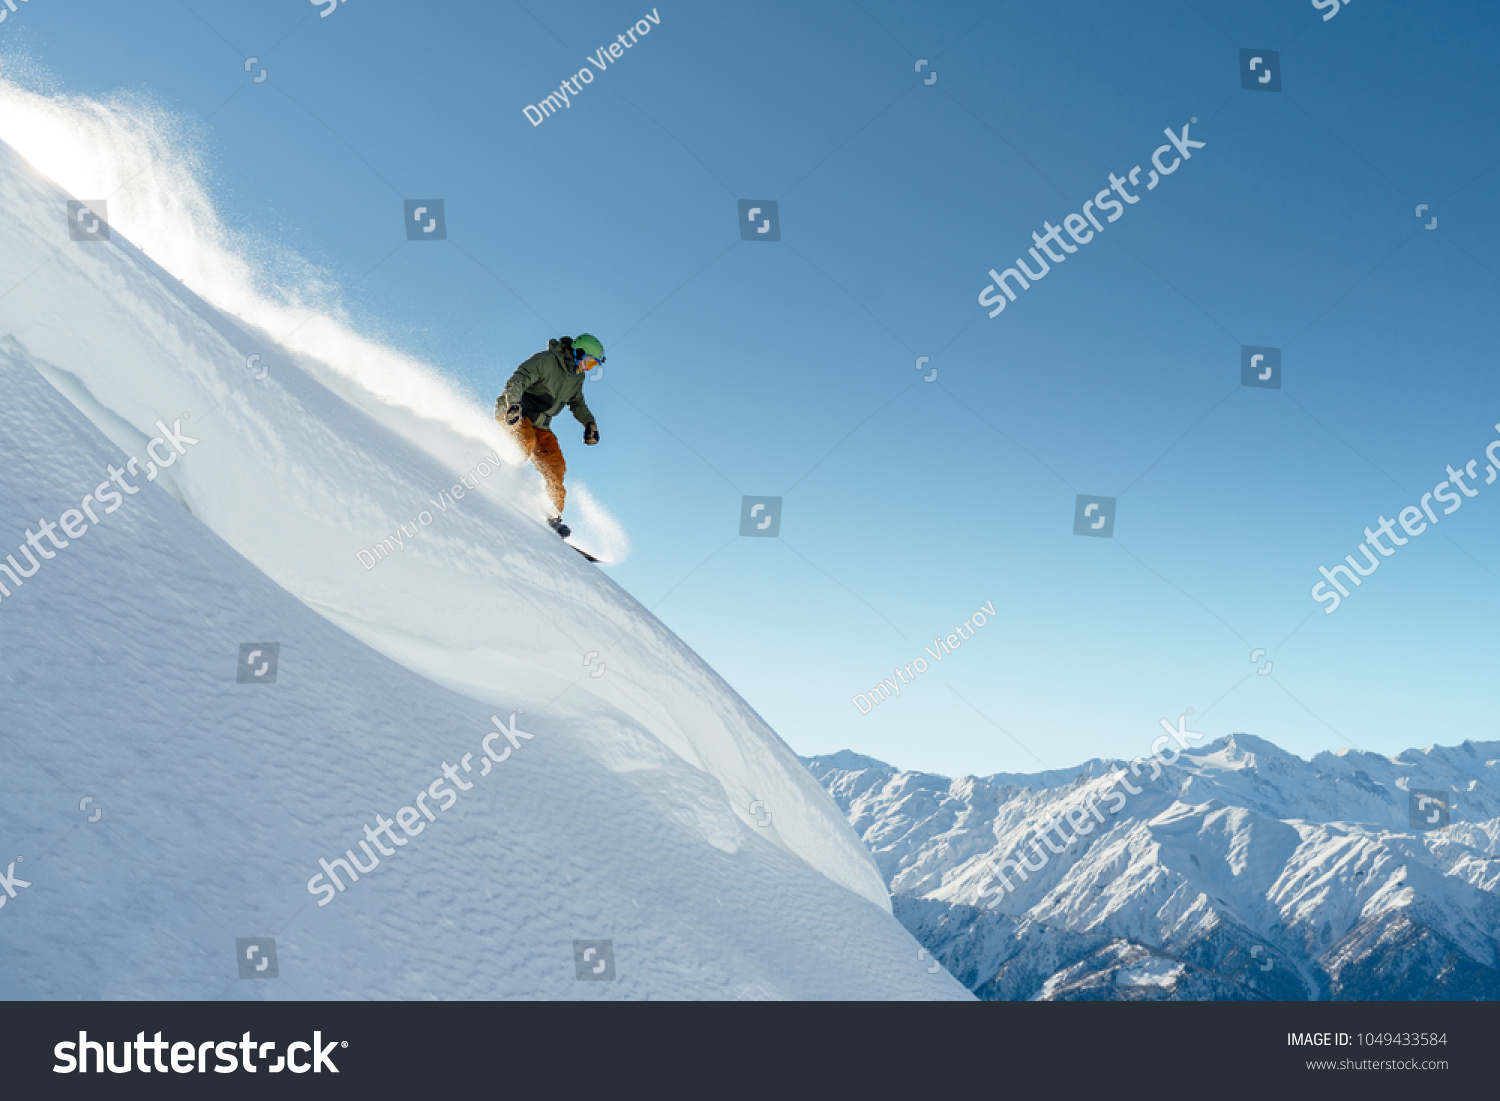 snowboarder rides on a steep mountainside on a beautiful landscape #1049433584